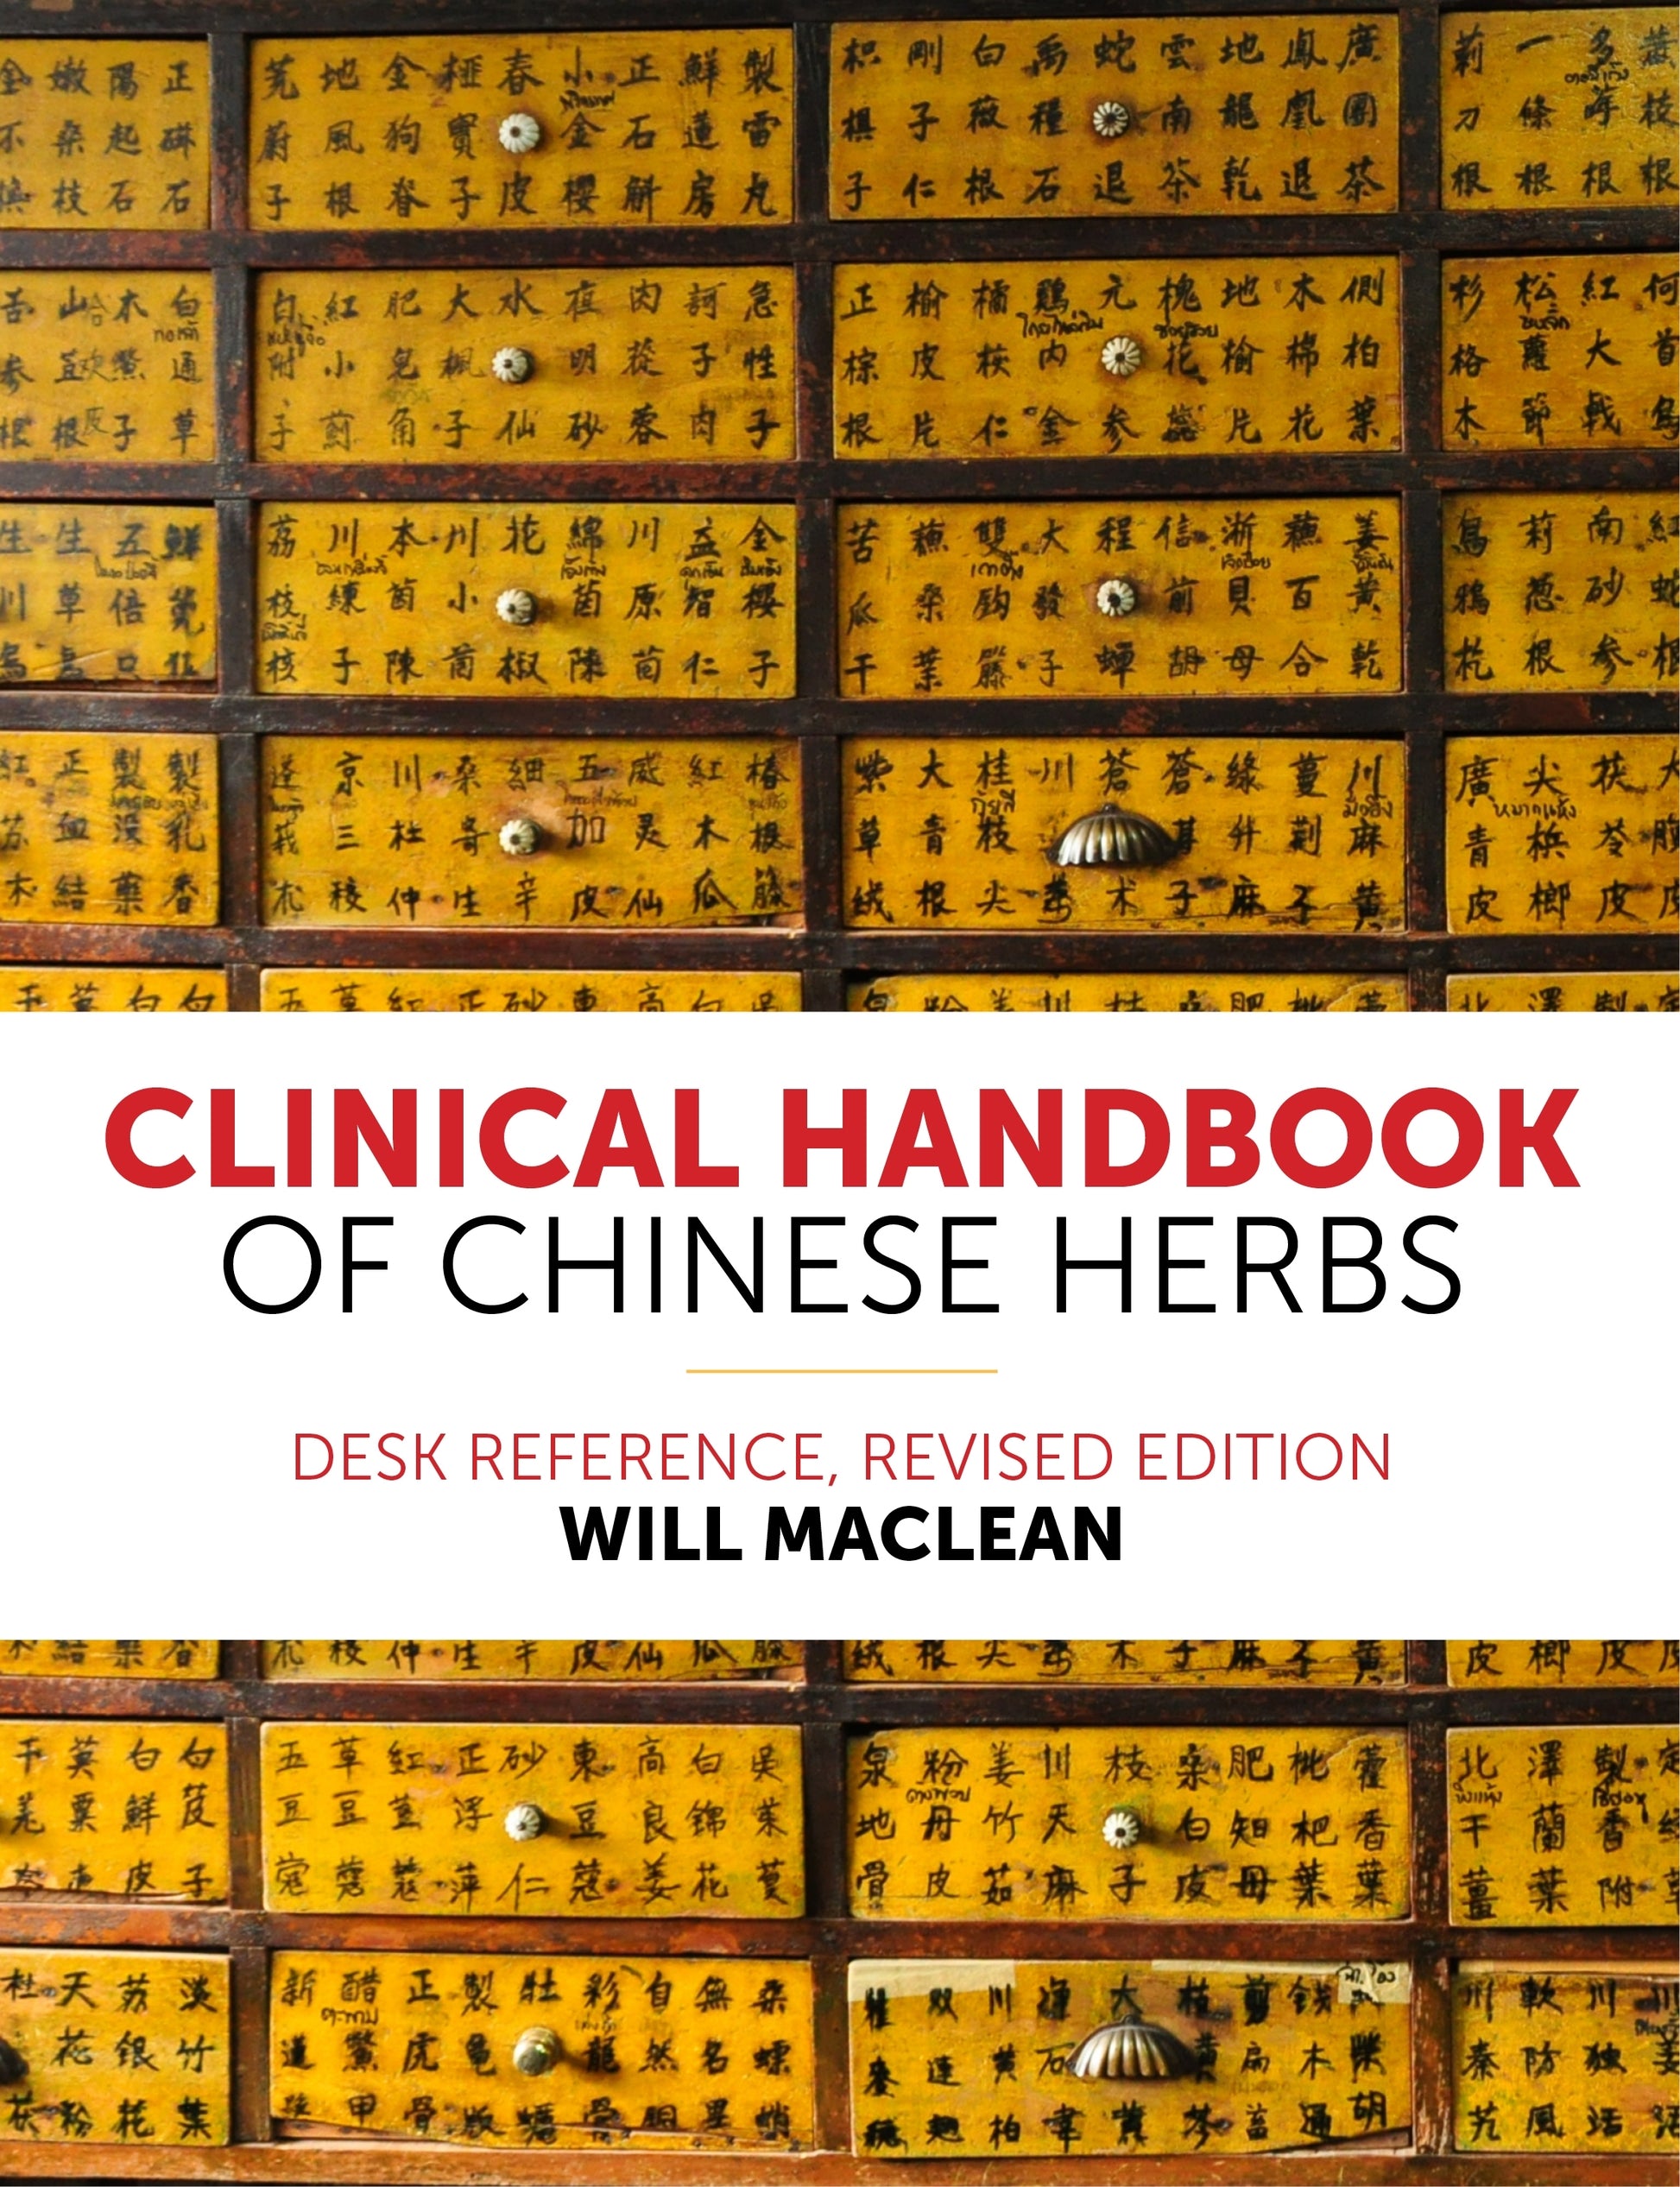 Clinical Handbook of Chinese Herbs by Will Maclean